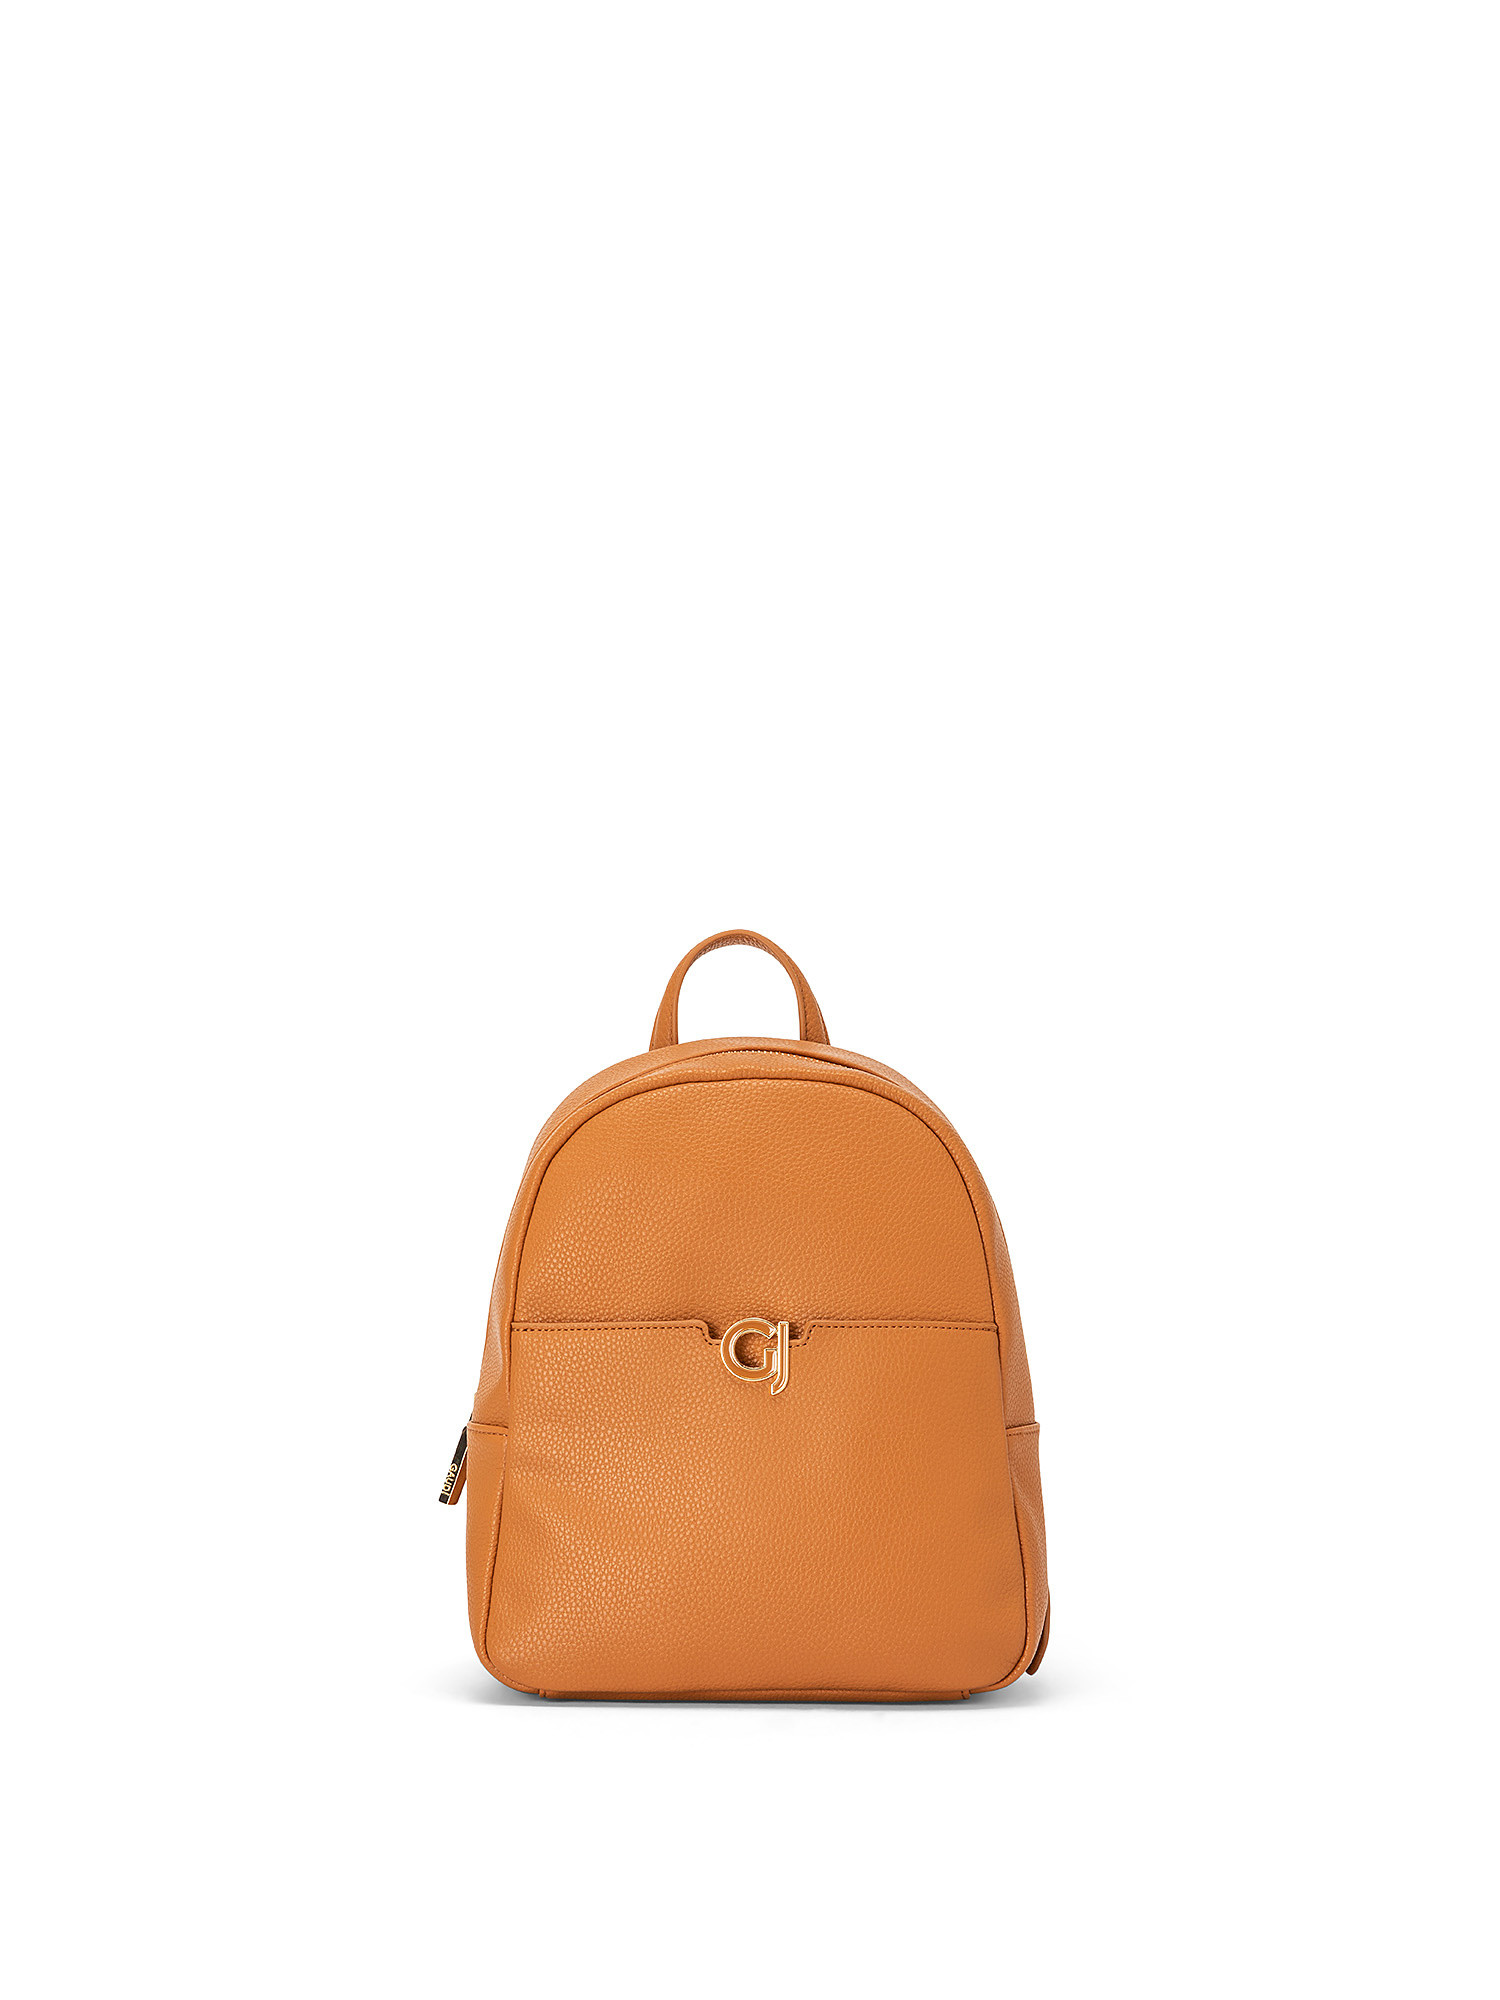 Sapphire backpack, Leather Brown, large image number 0